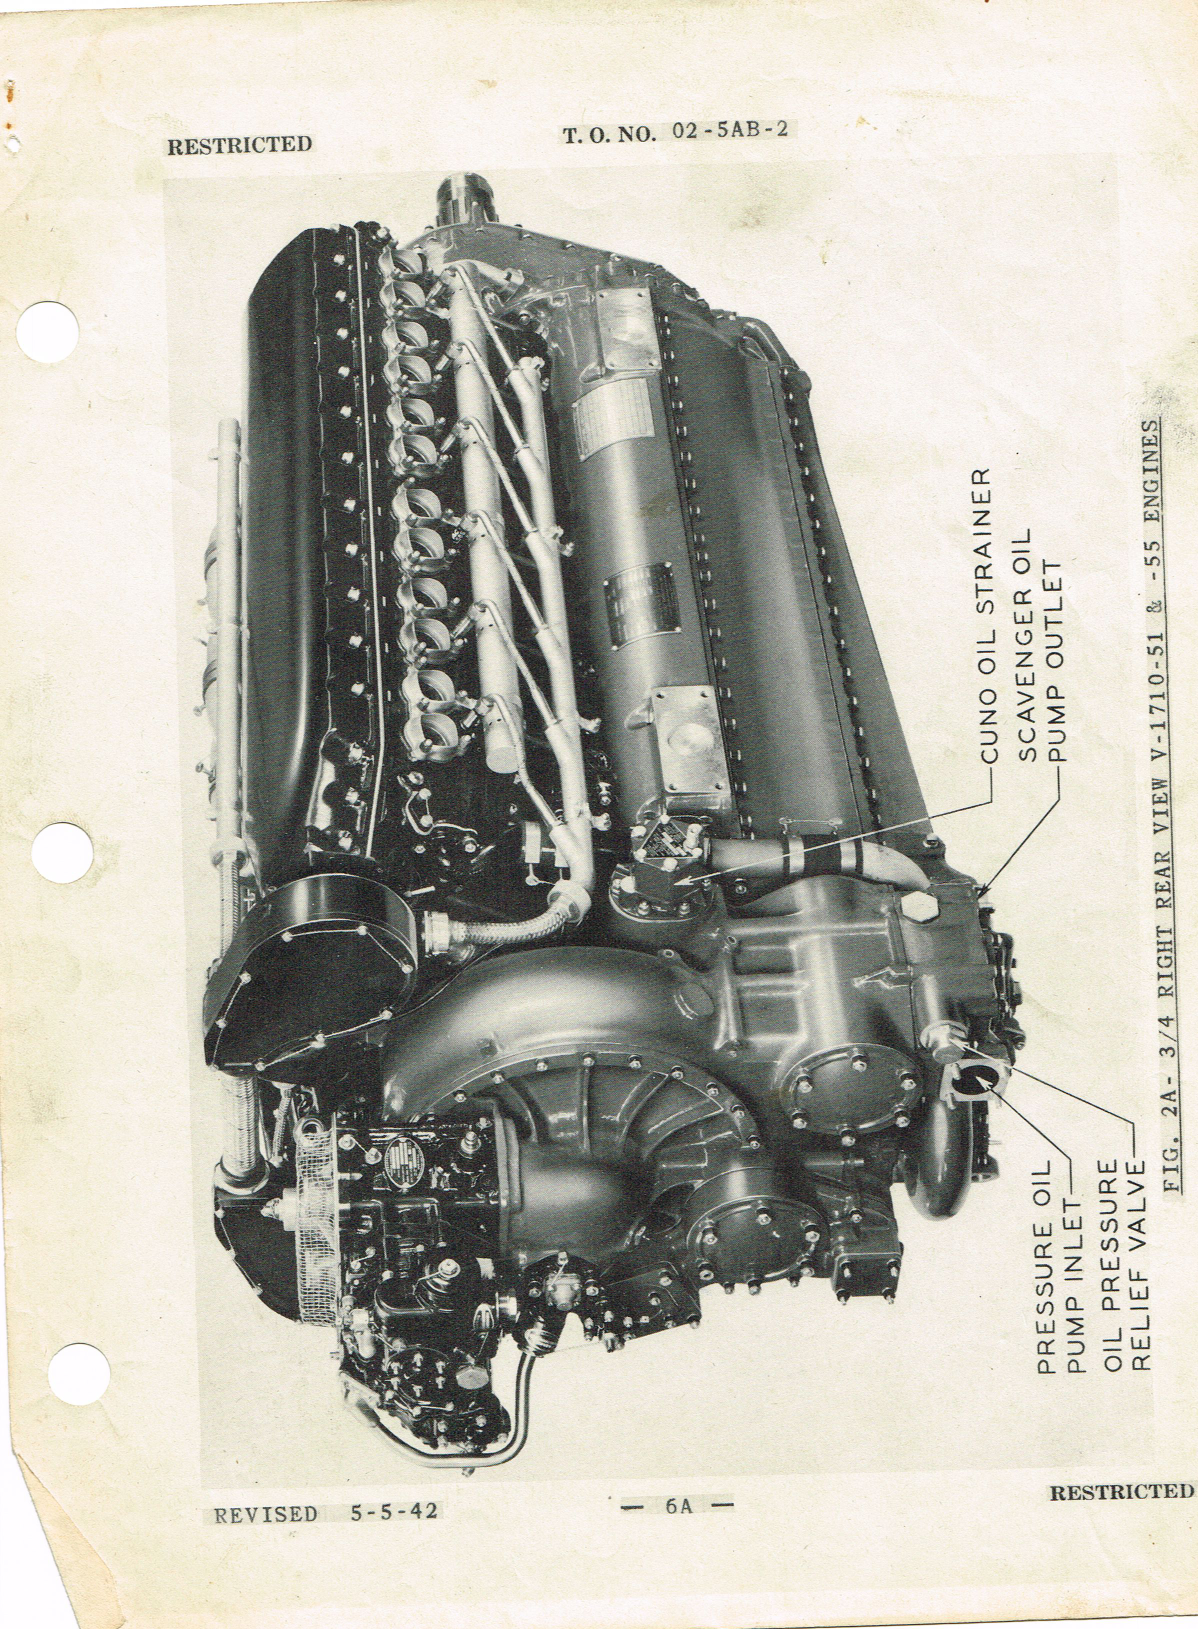 Sample page 7 from AirCorps Library document: Service Instructions for the V-1710 Series Aircraft Engines